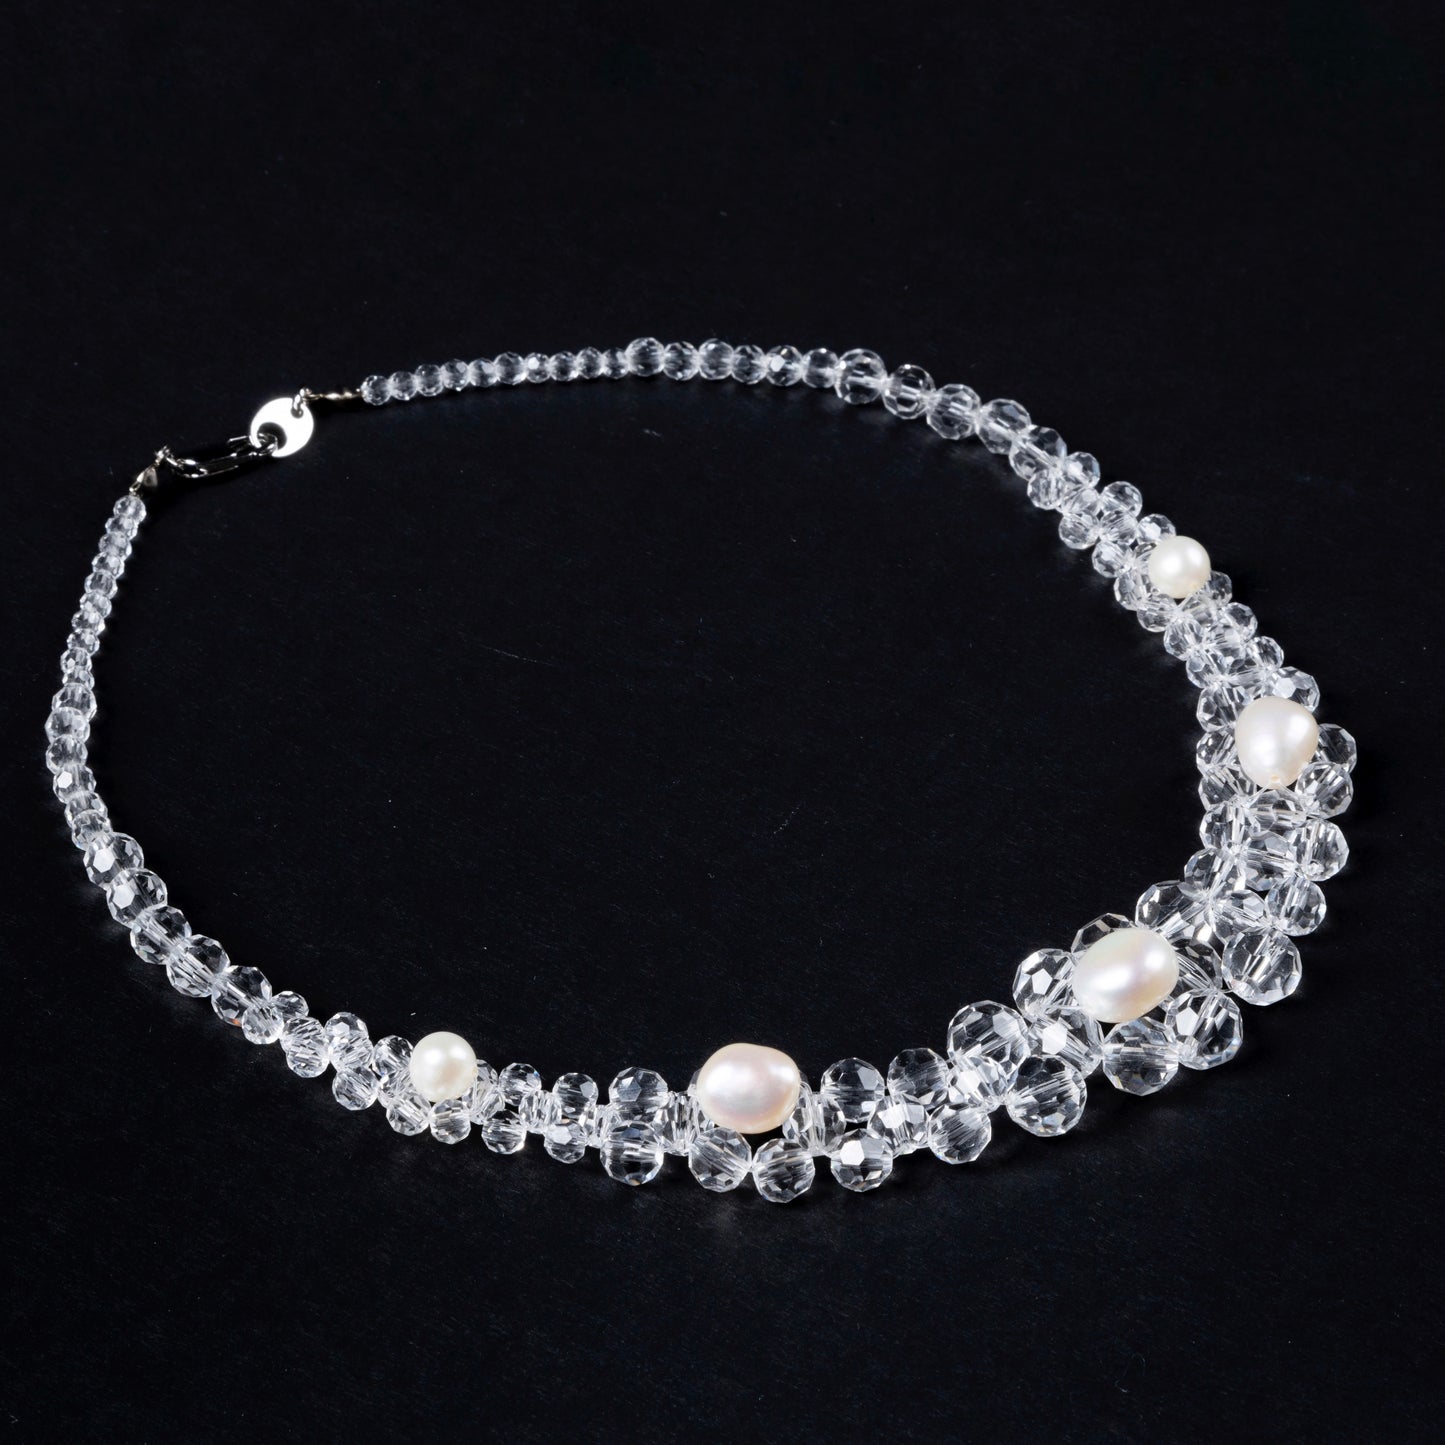 Crystal Beaded Baroque Pearl Necklace and Earrings Clear